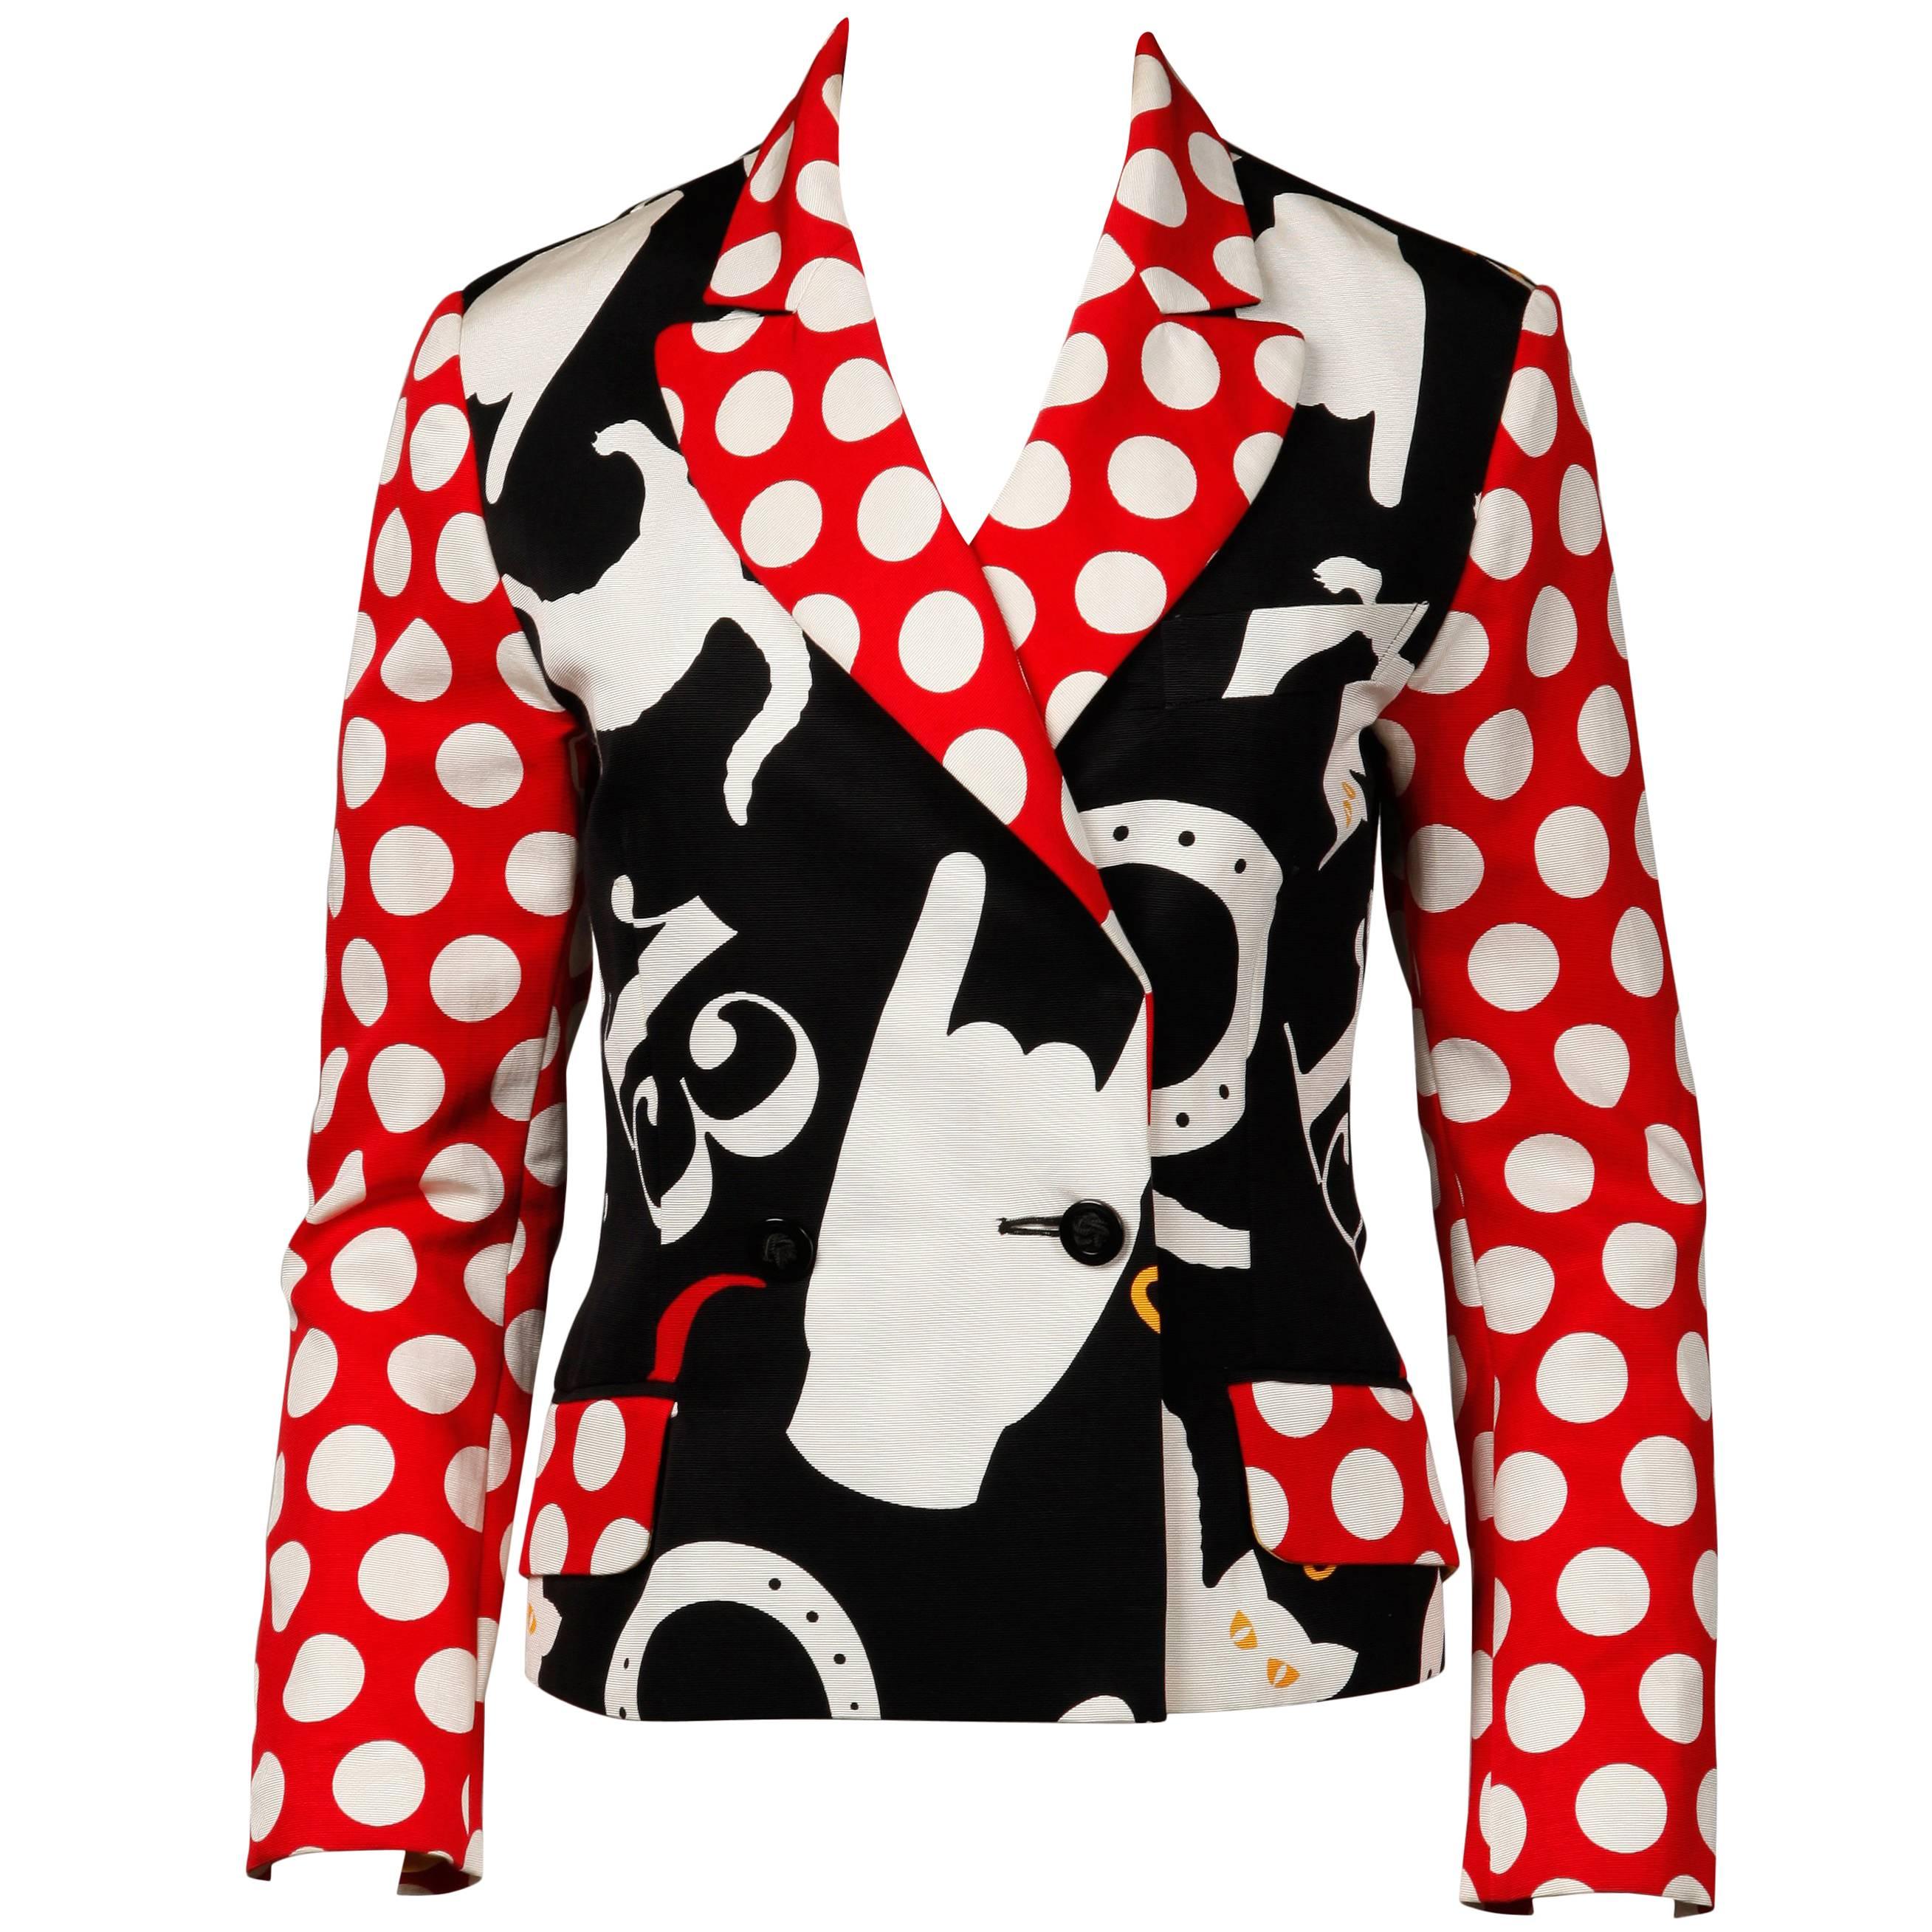 Iconic Moschino Vintage 90s Pop Art Blazer Jacket with Lucky 13, Horseshoe + Cat For Sale